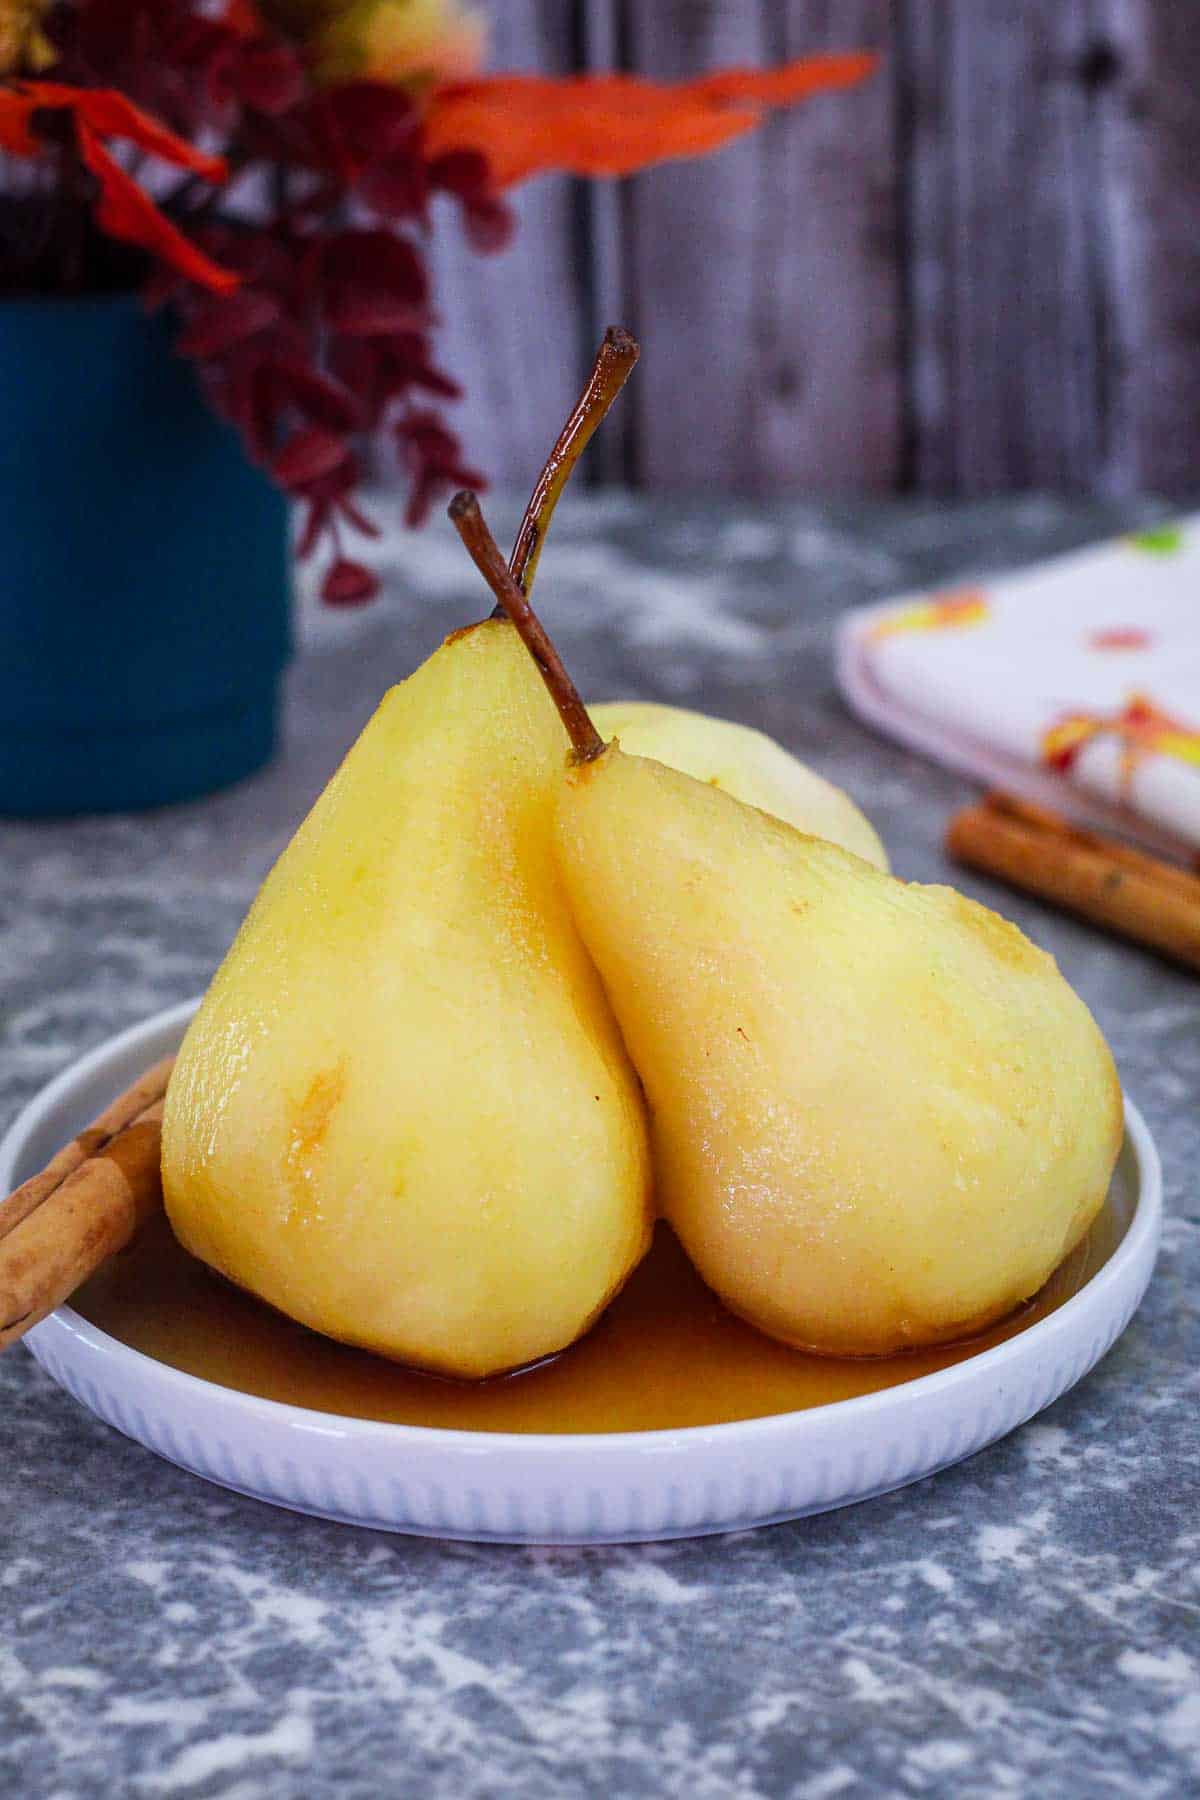 Poached pears in white wine syrup with spices. There's flowers and a kitchen towel in the background.